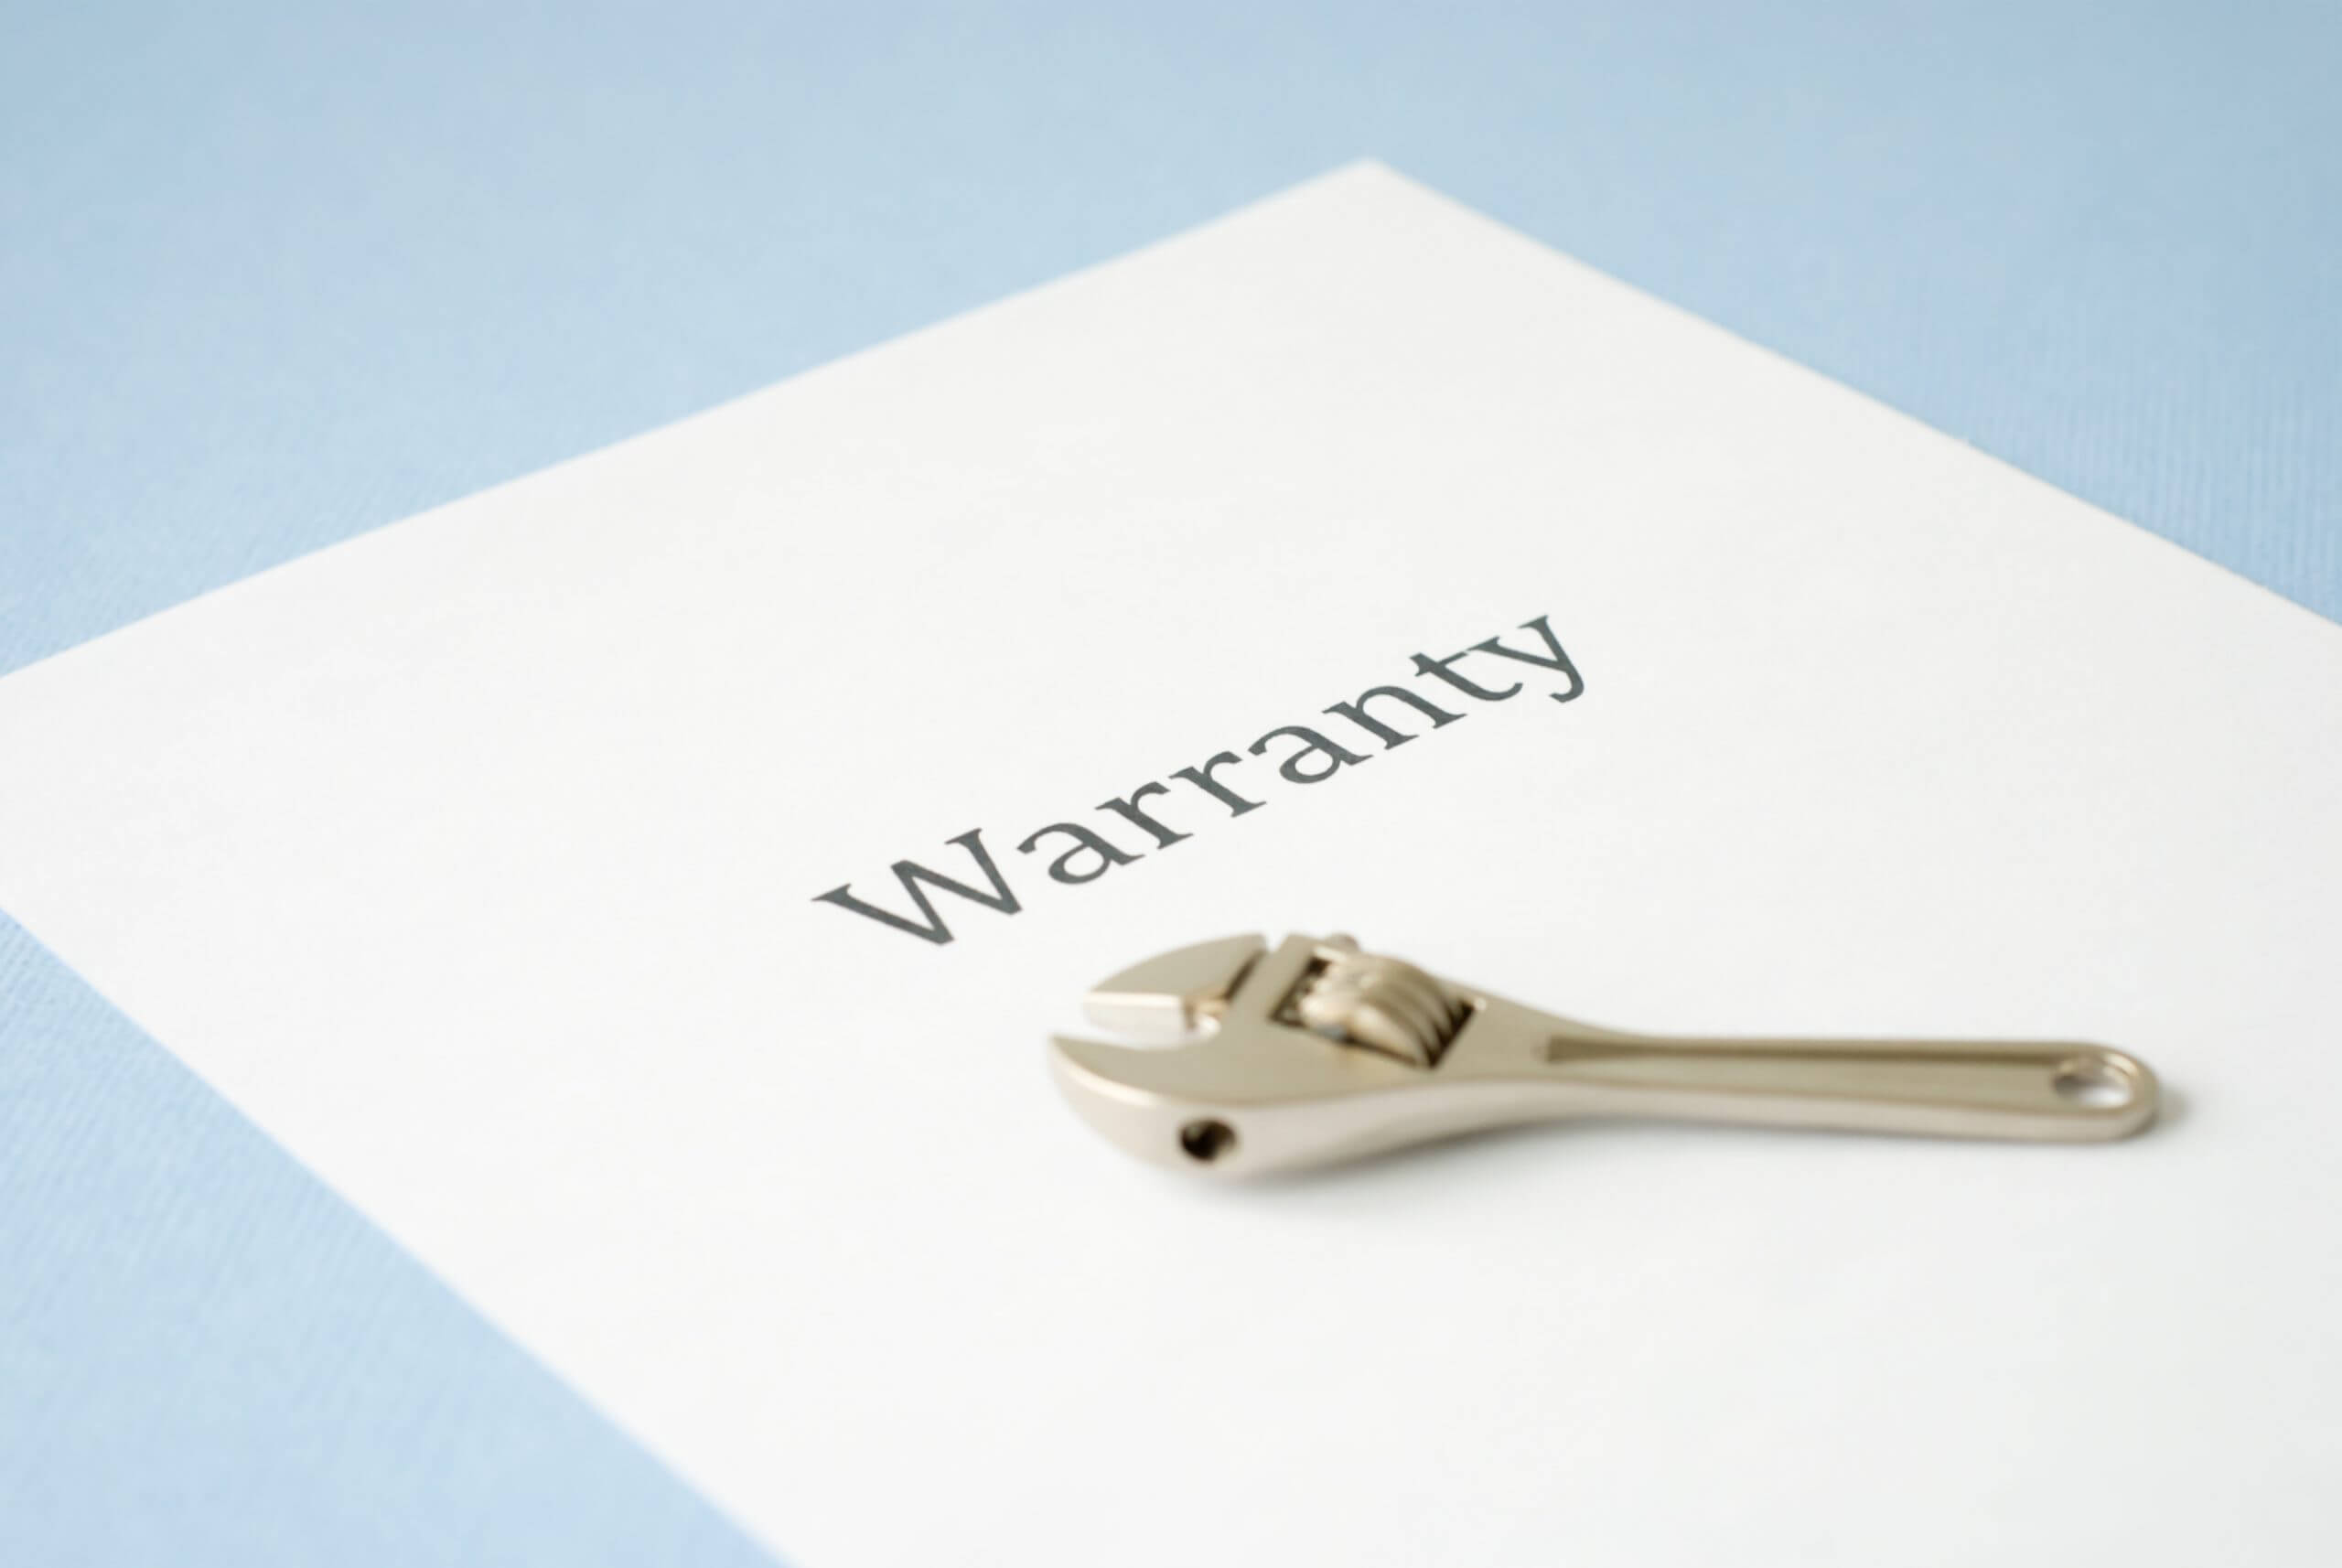 Word "Warranty" printed on a white paper